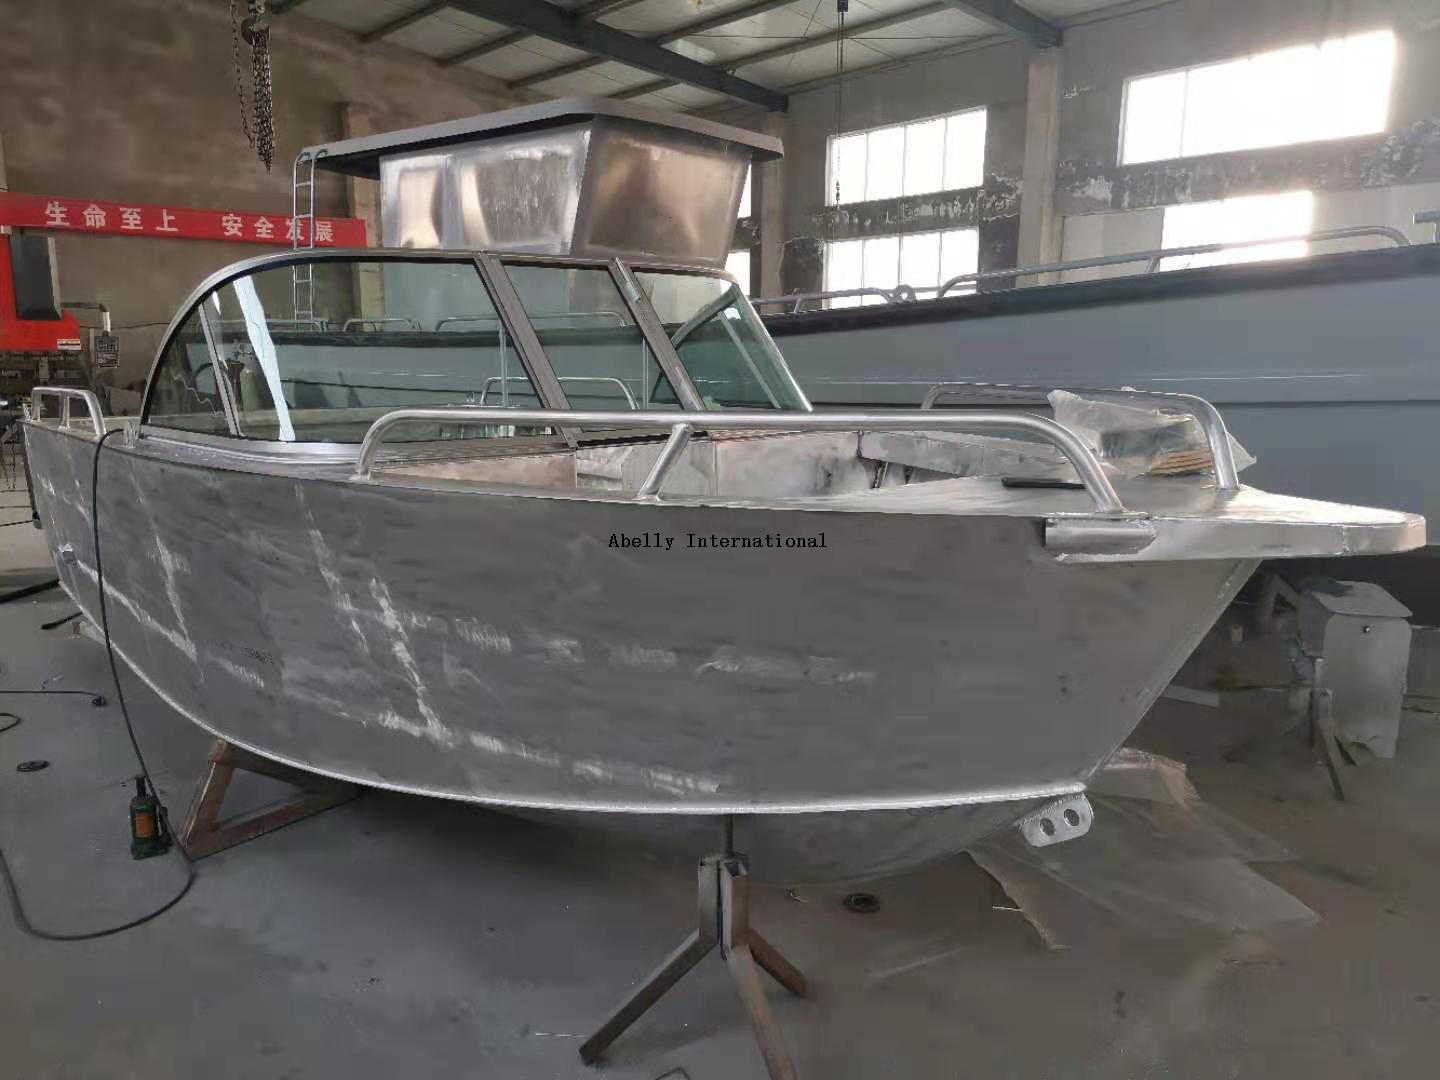 Abelly 580 All Welded Bowrider boat